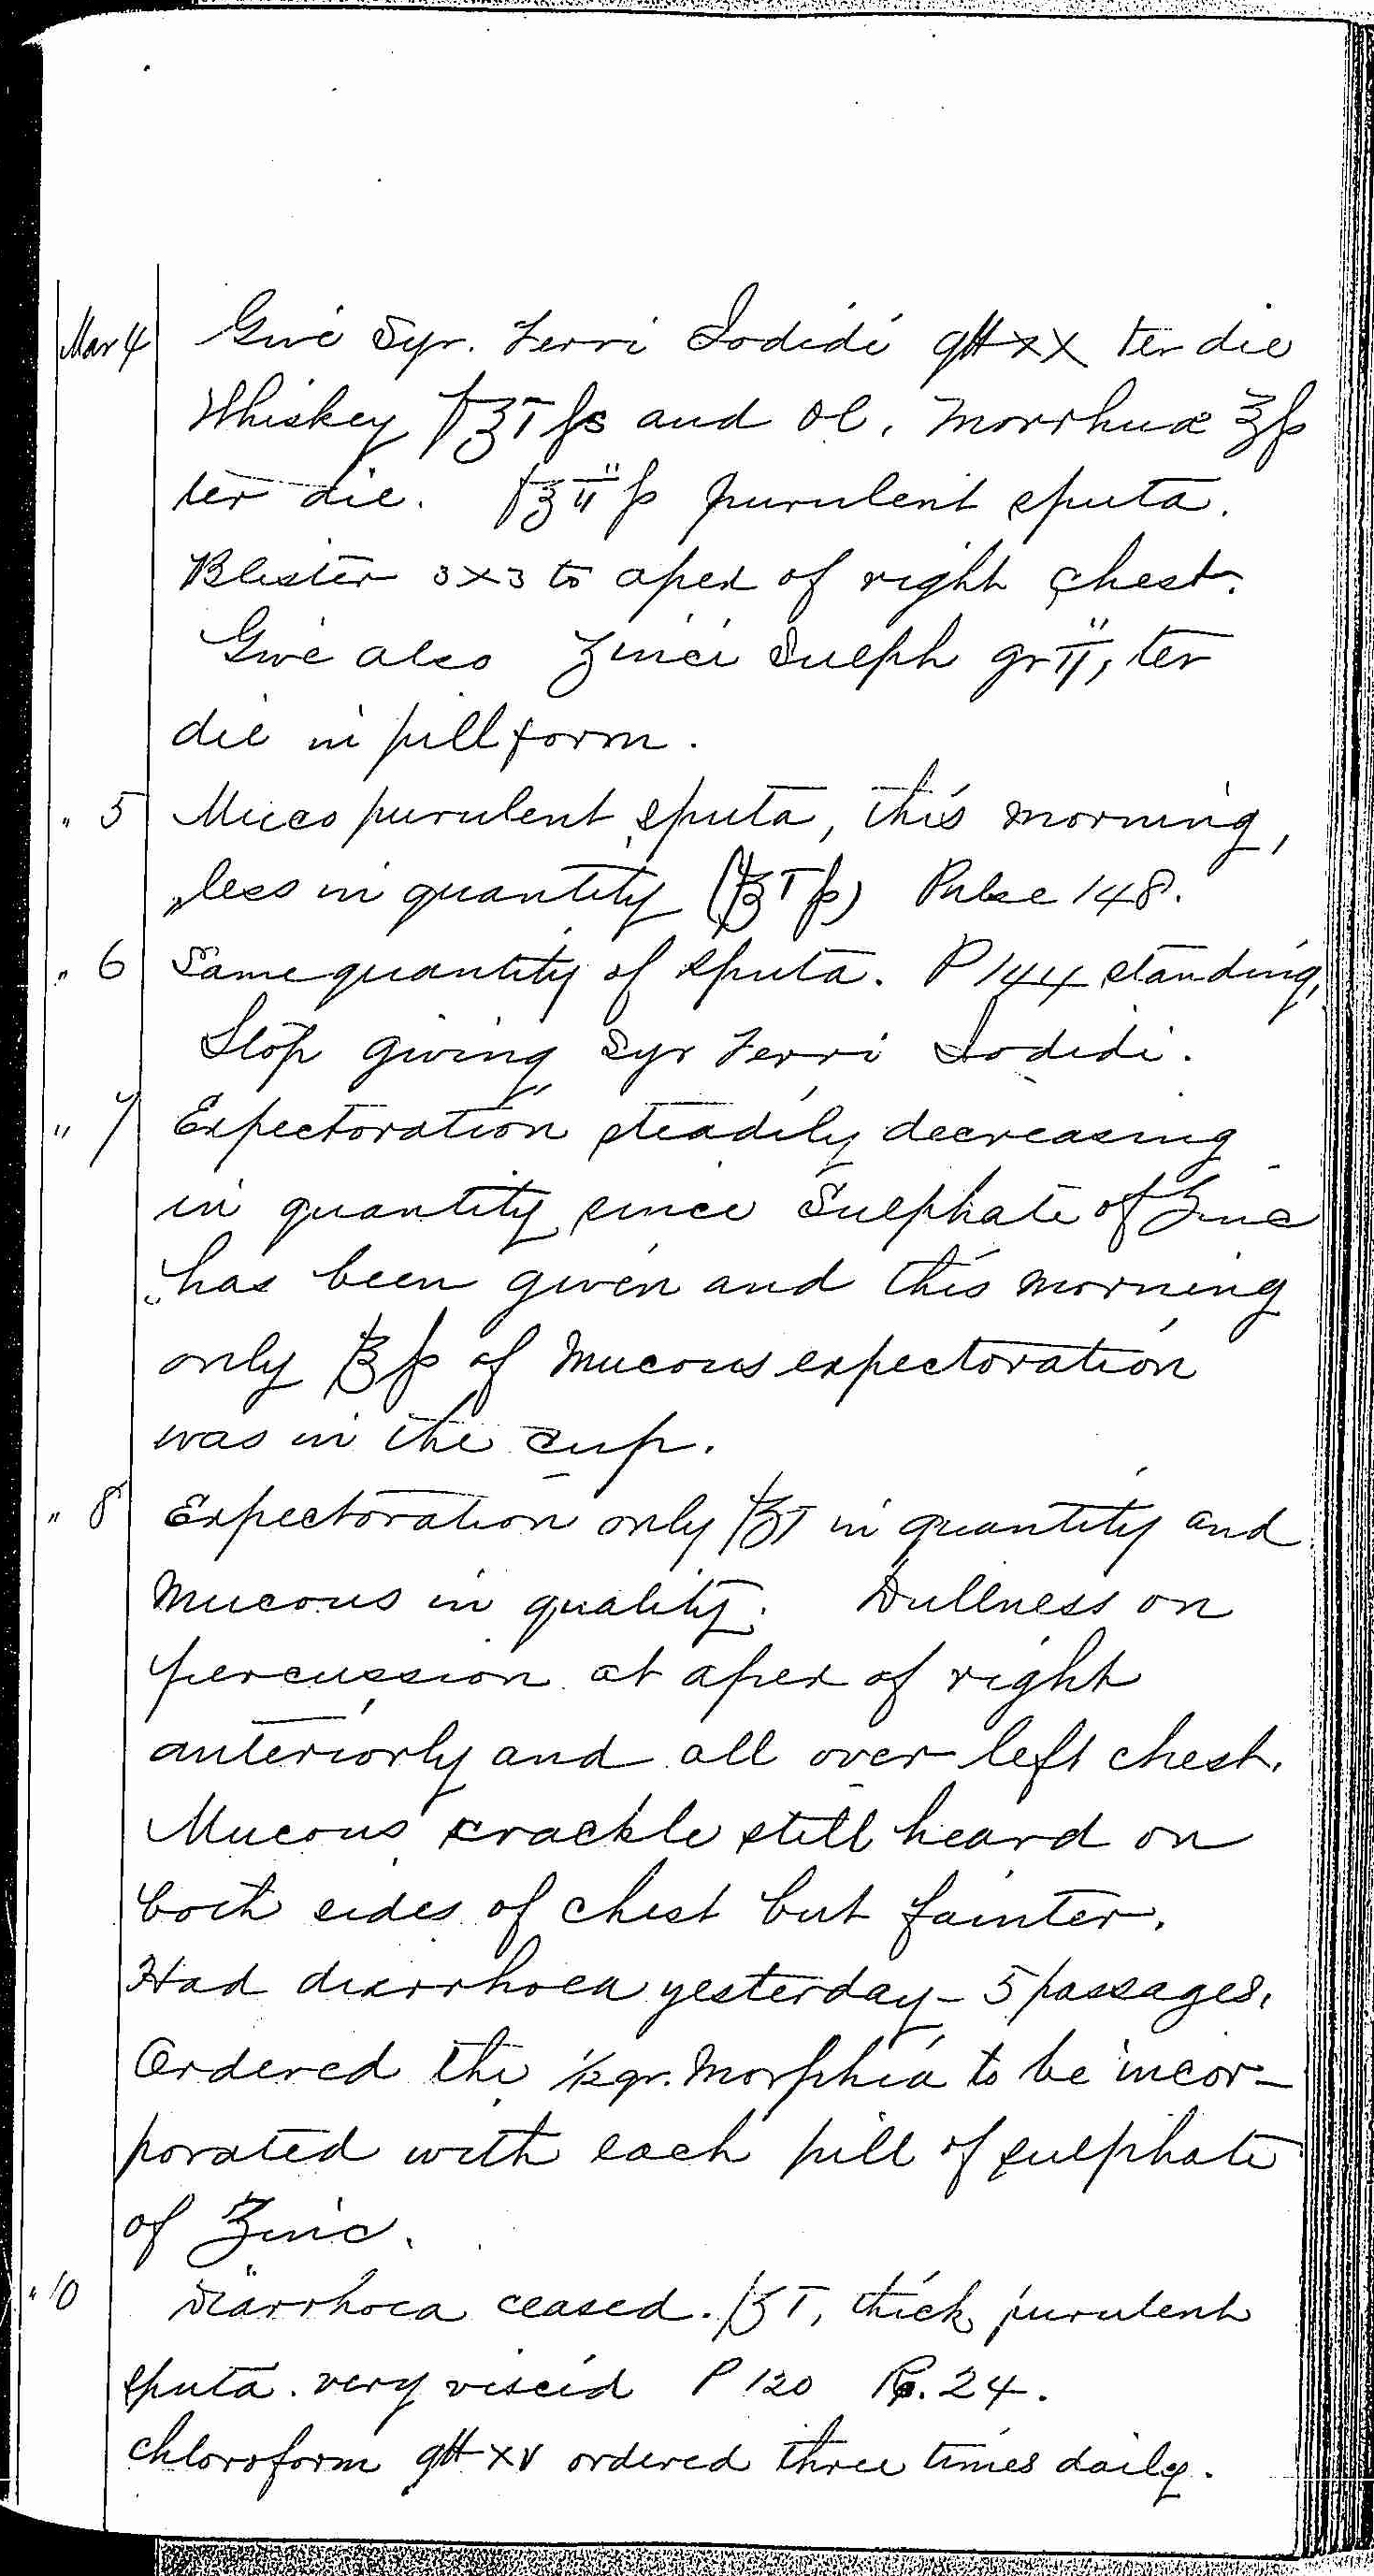 Entry for William Bathwell (page 9 of 13) in the log Hospital Tickets and Case Papers - Naval Hospital - Washington, D.C. - 1868-69